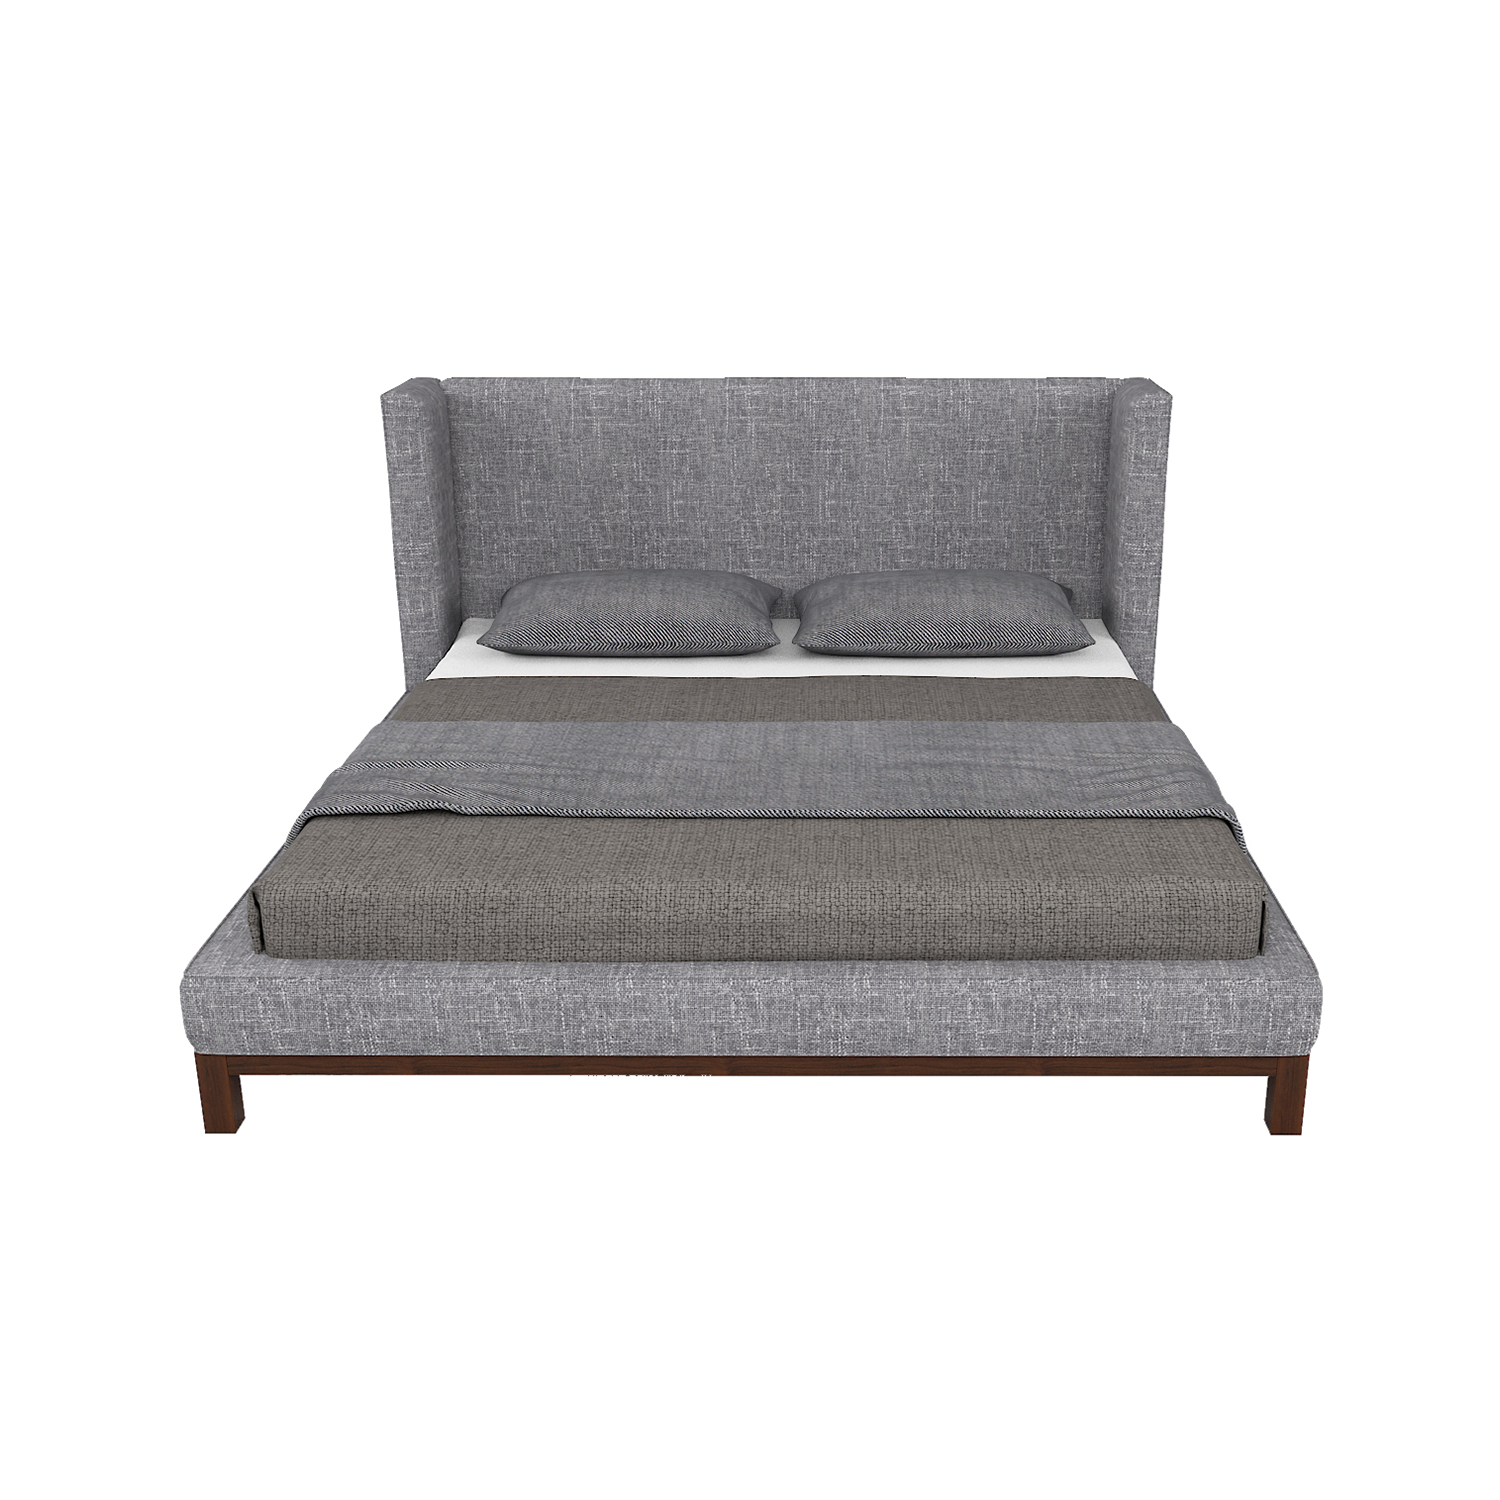 Cove Bed | Nathan Anthony | Beds | cove-bed